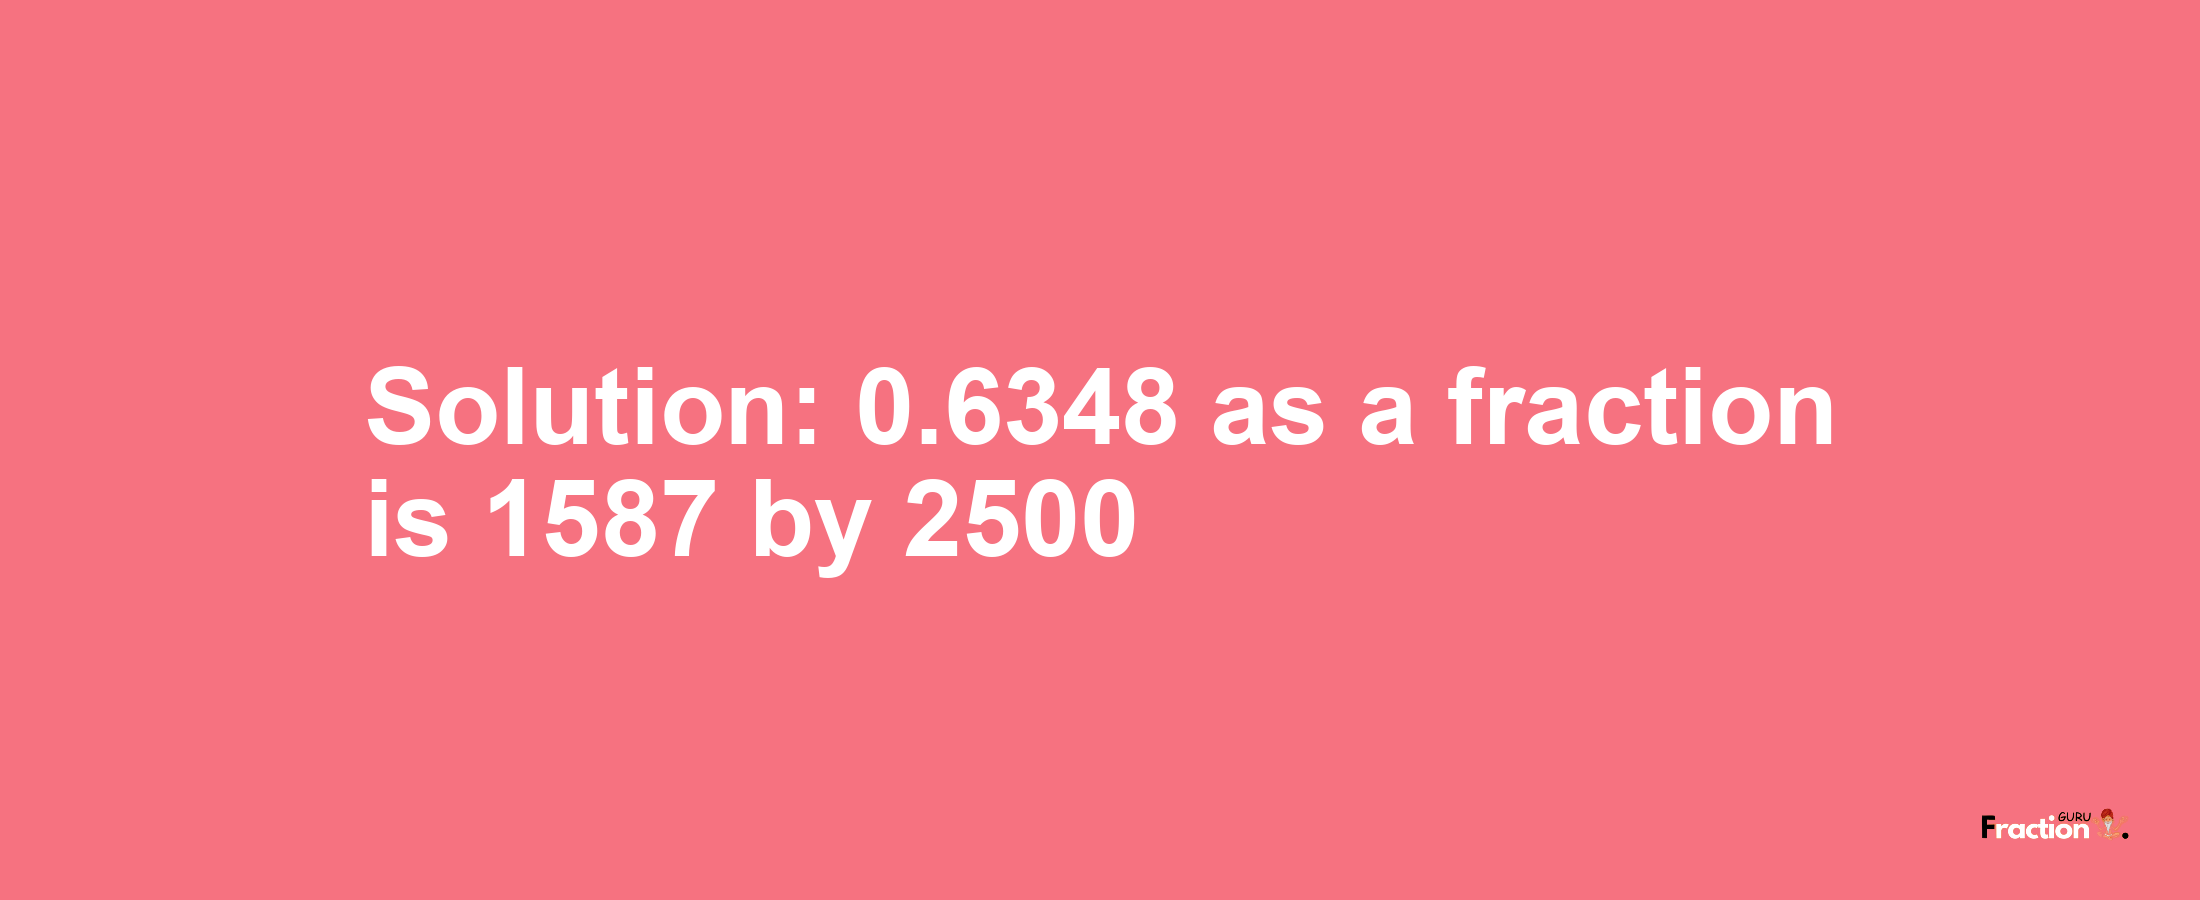 Solution:0.6348 as a fraction is 1587/2500